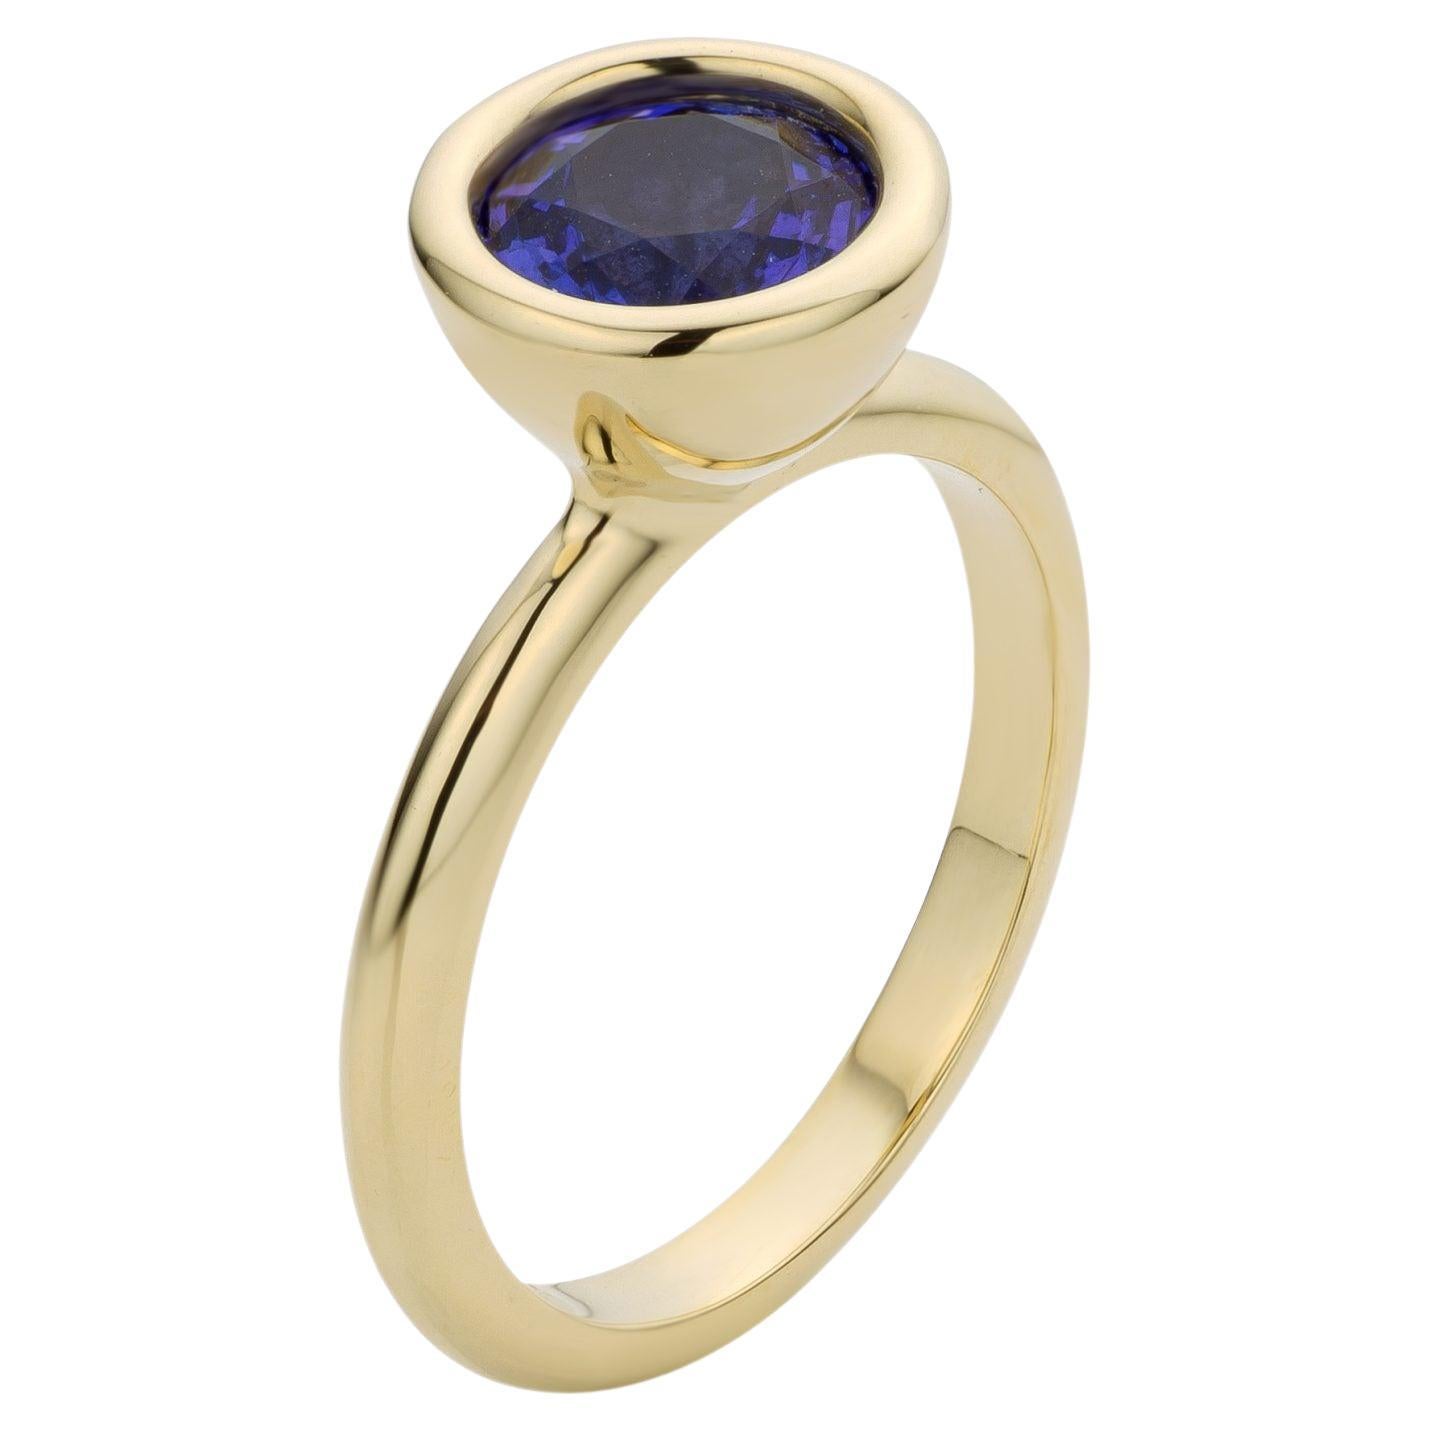 Cober multiple rings often worn together with 1.85 Carat Tanzanite Stacking Ring